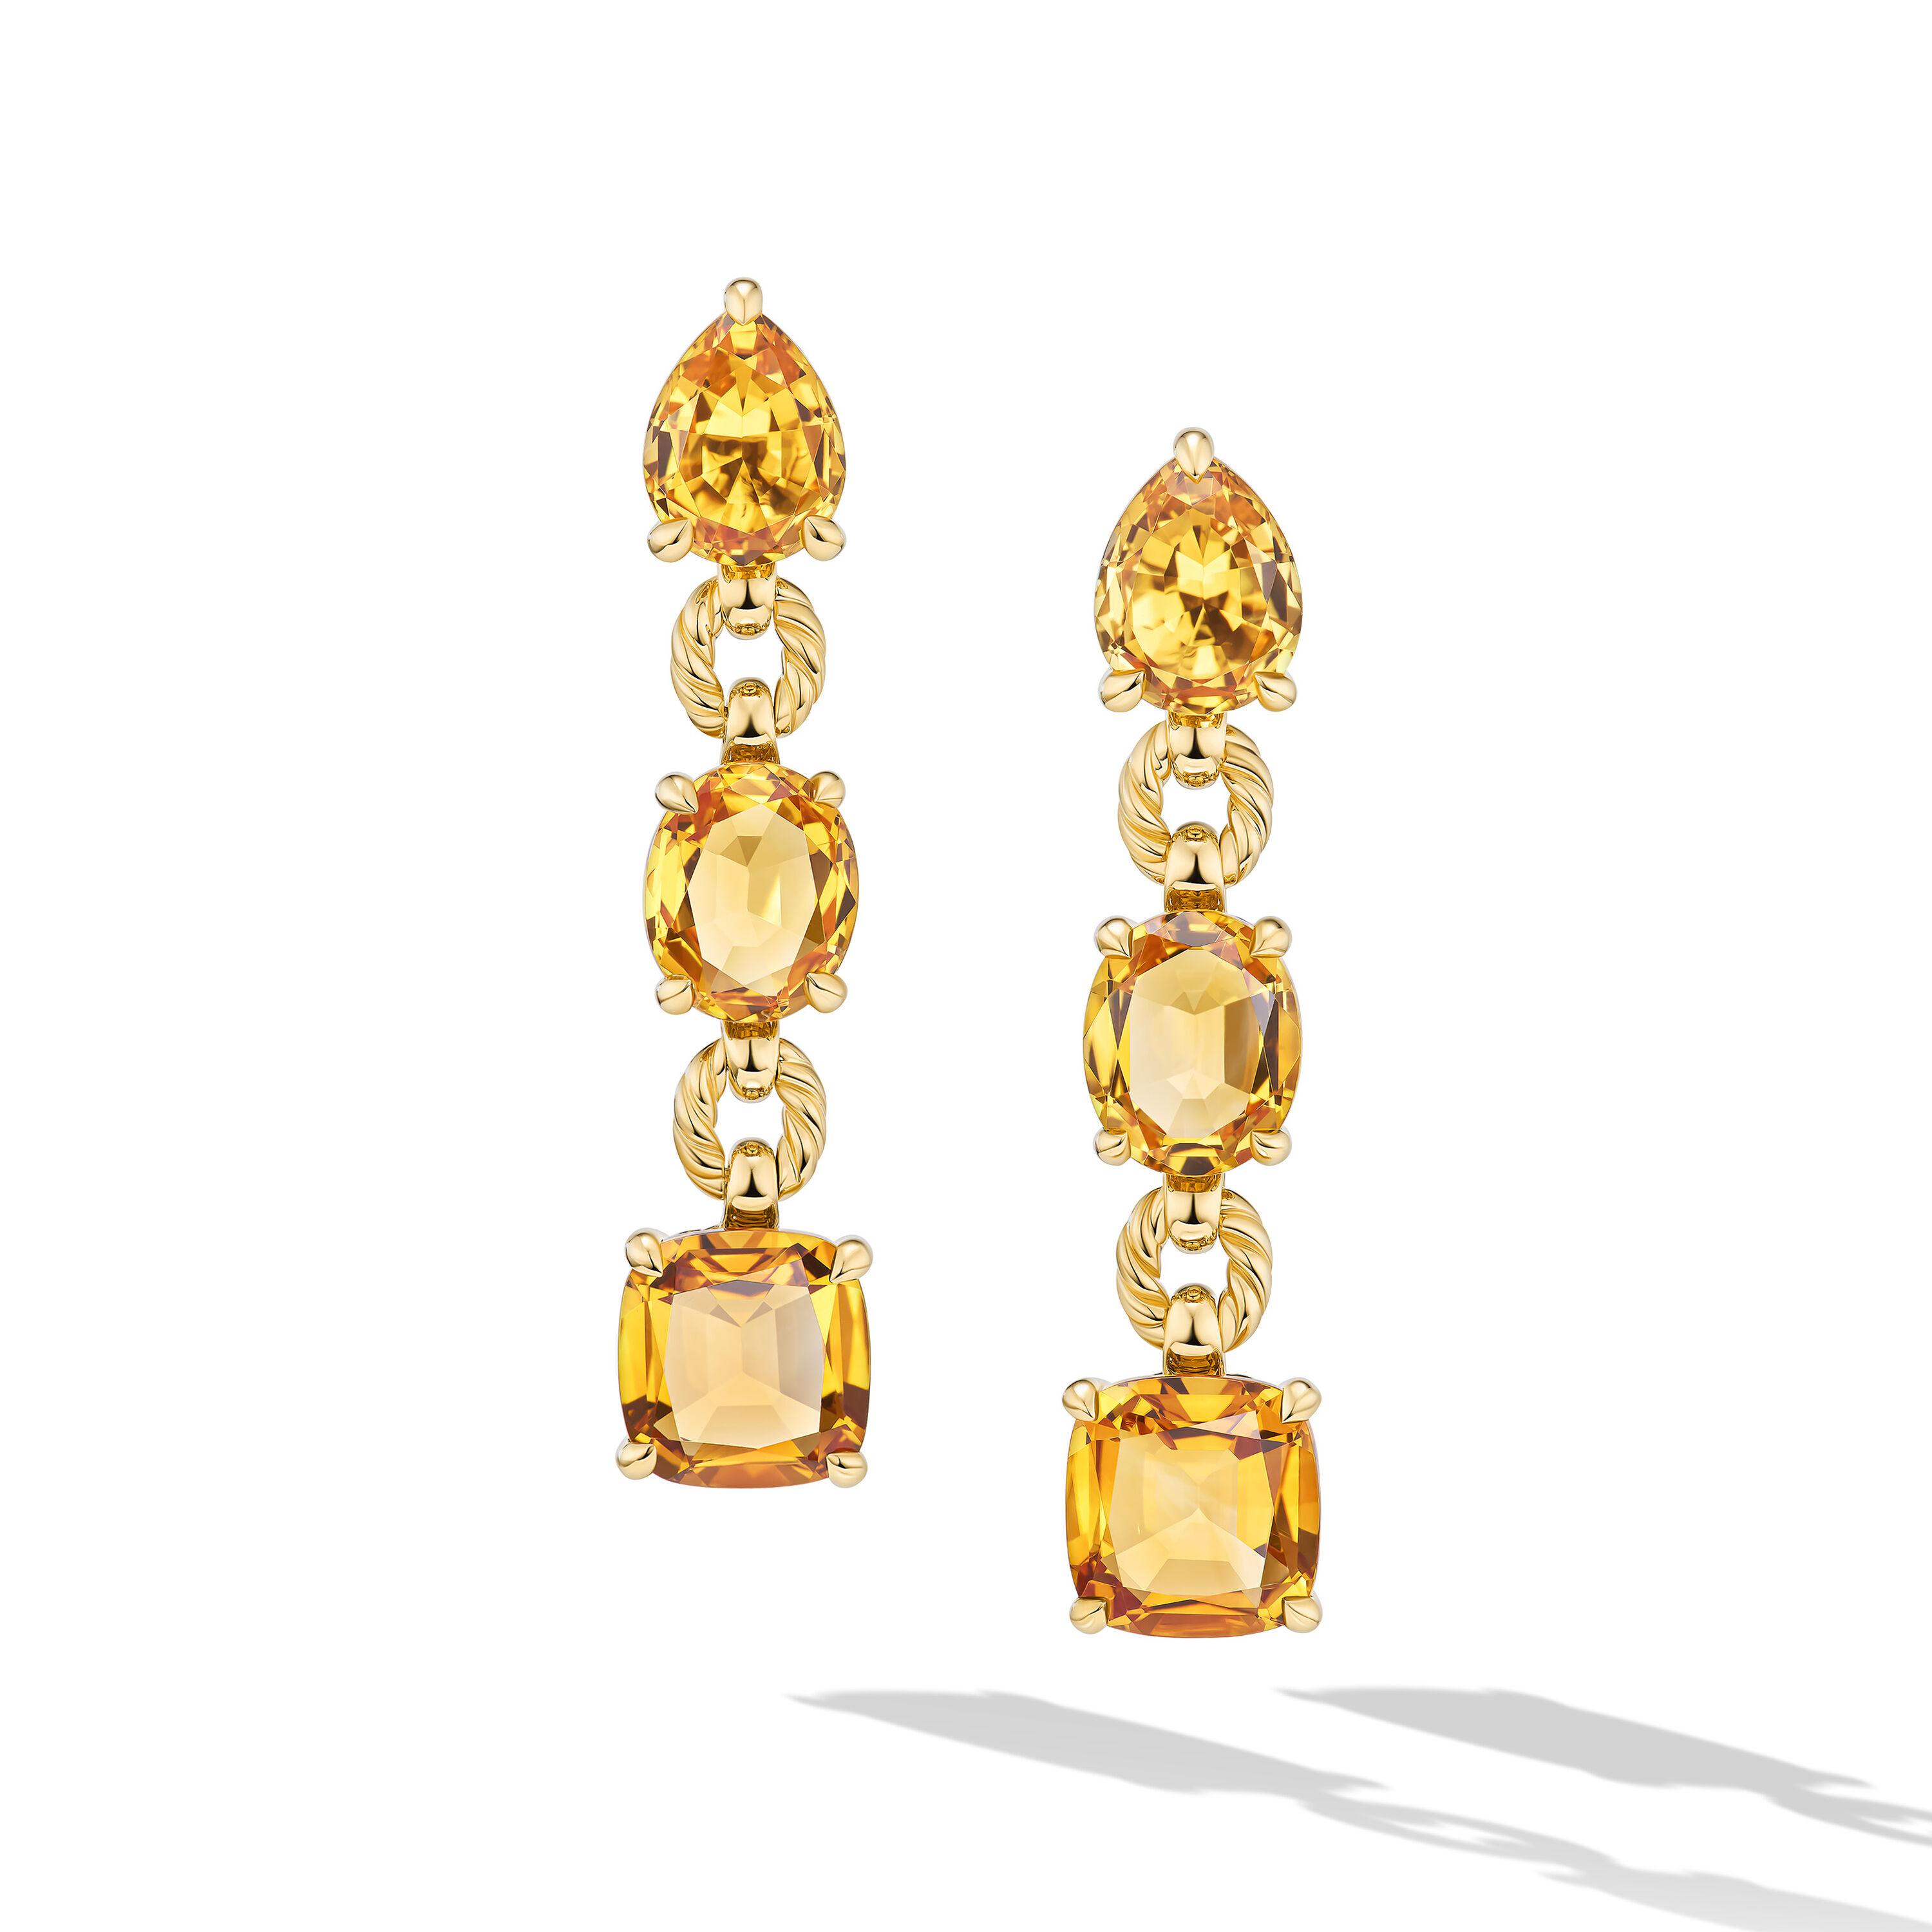 David Yurman Marbella Drop Earrings in 18K Yellow Gold with Citrine and Madeira Citrine